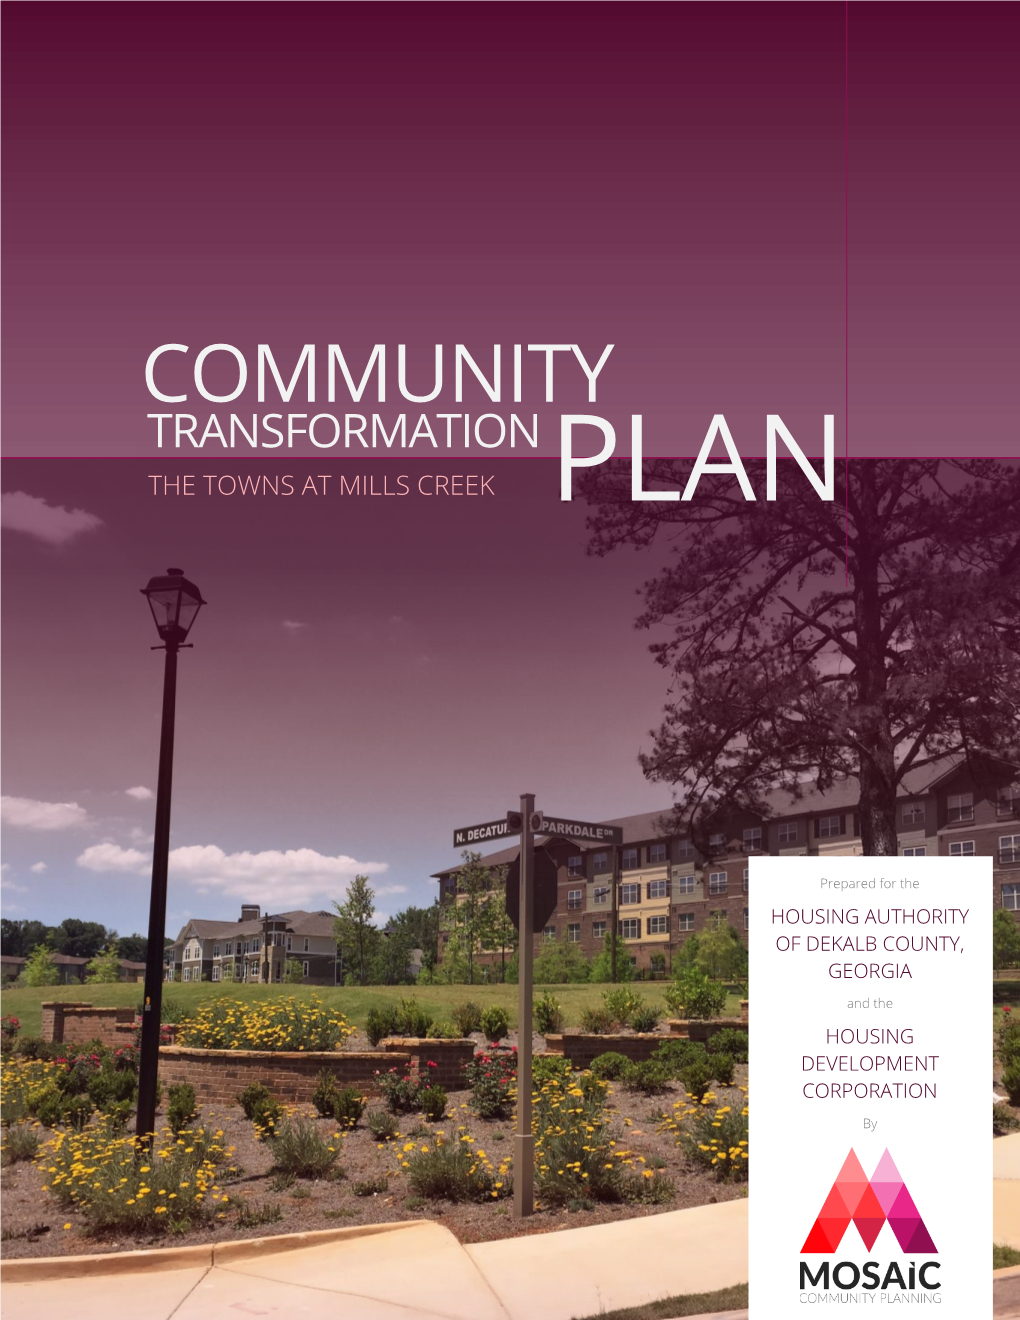 Community Transformation the Towns at Mills Creek Plan